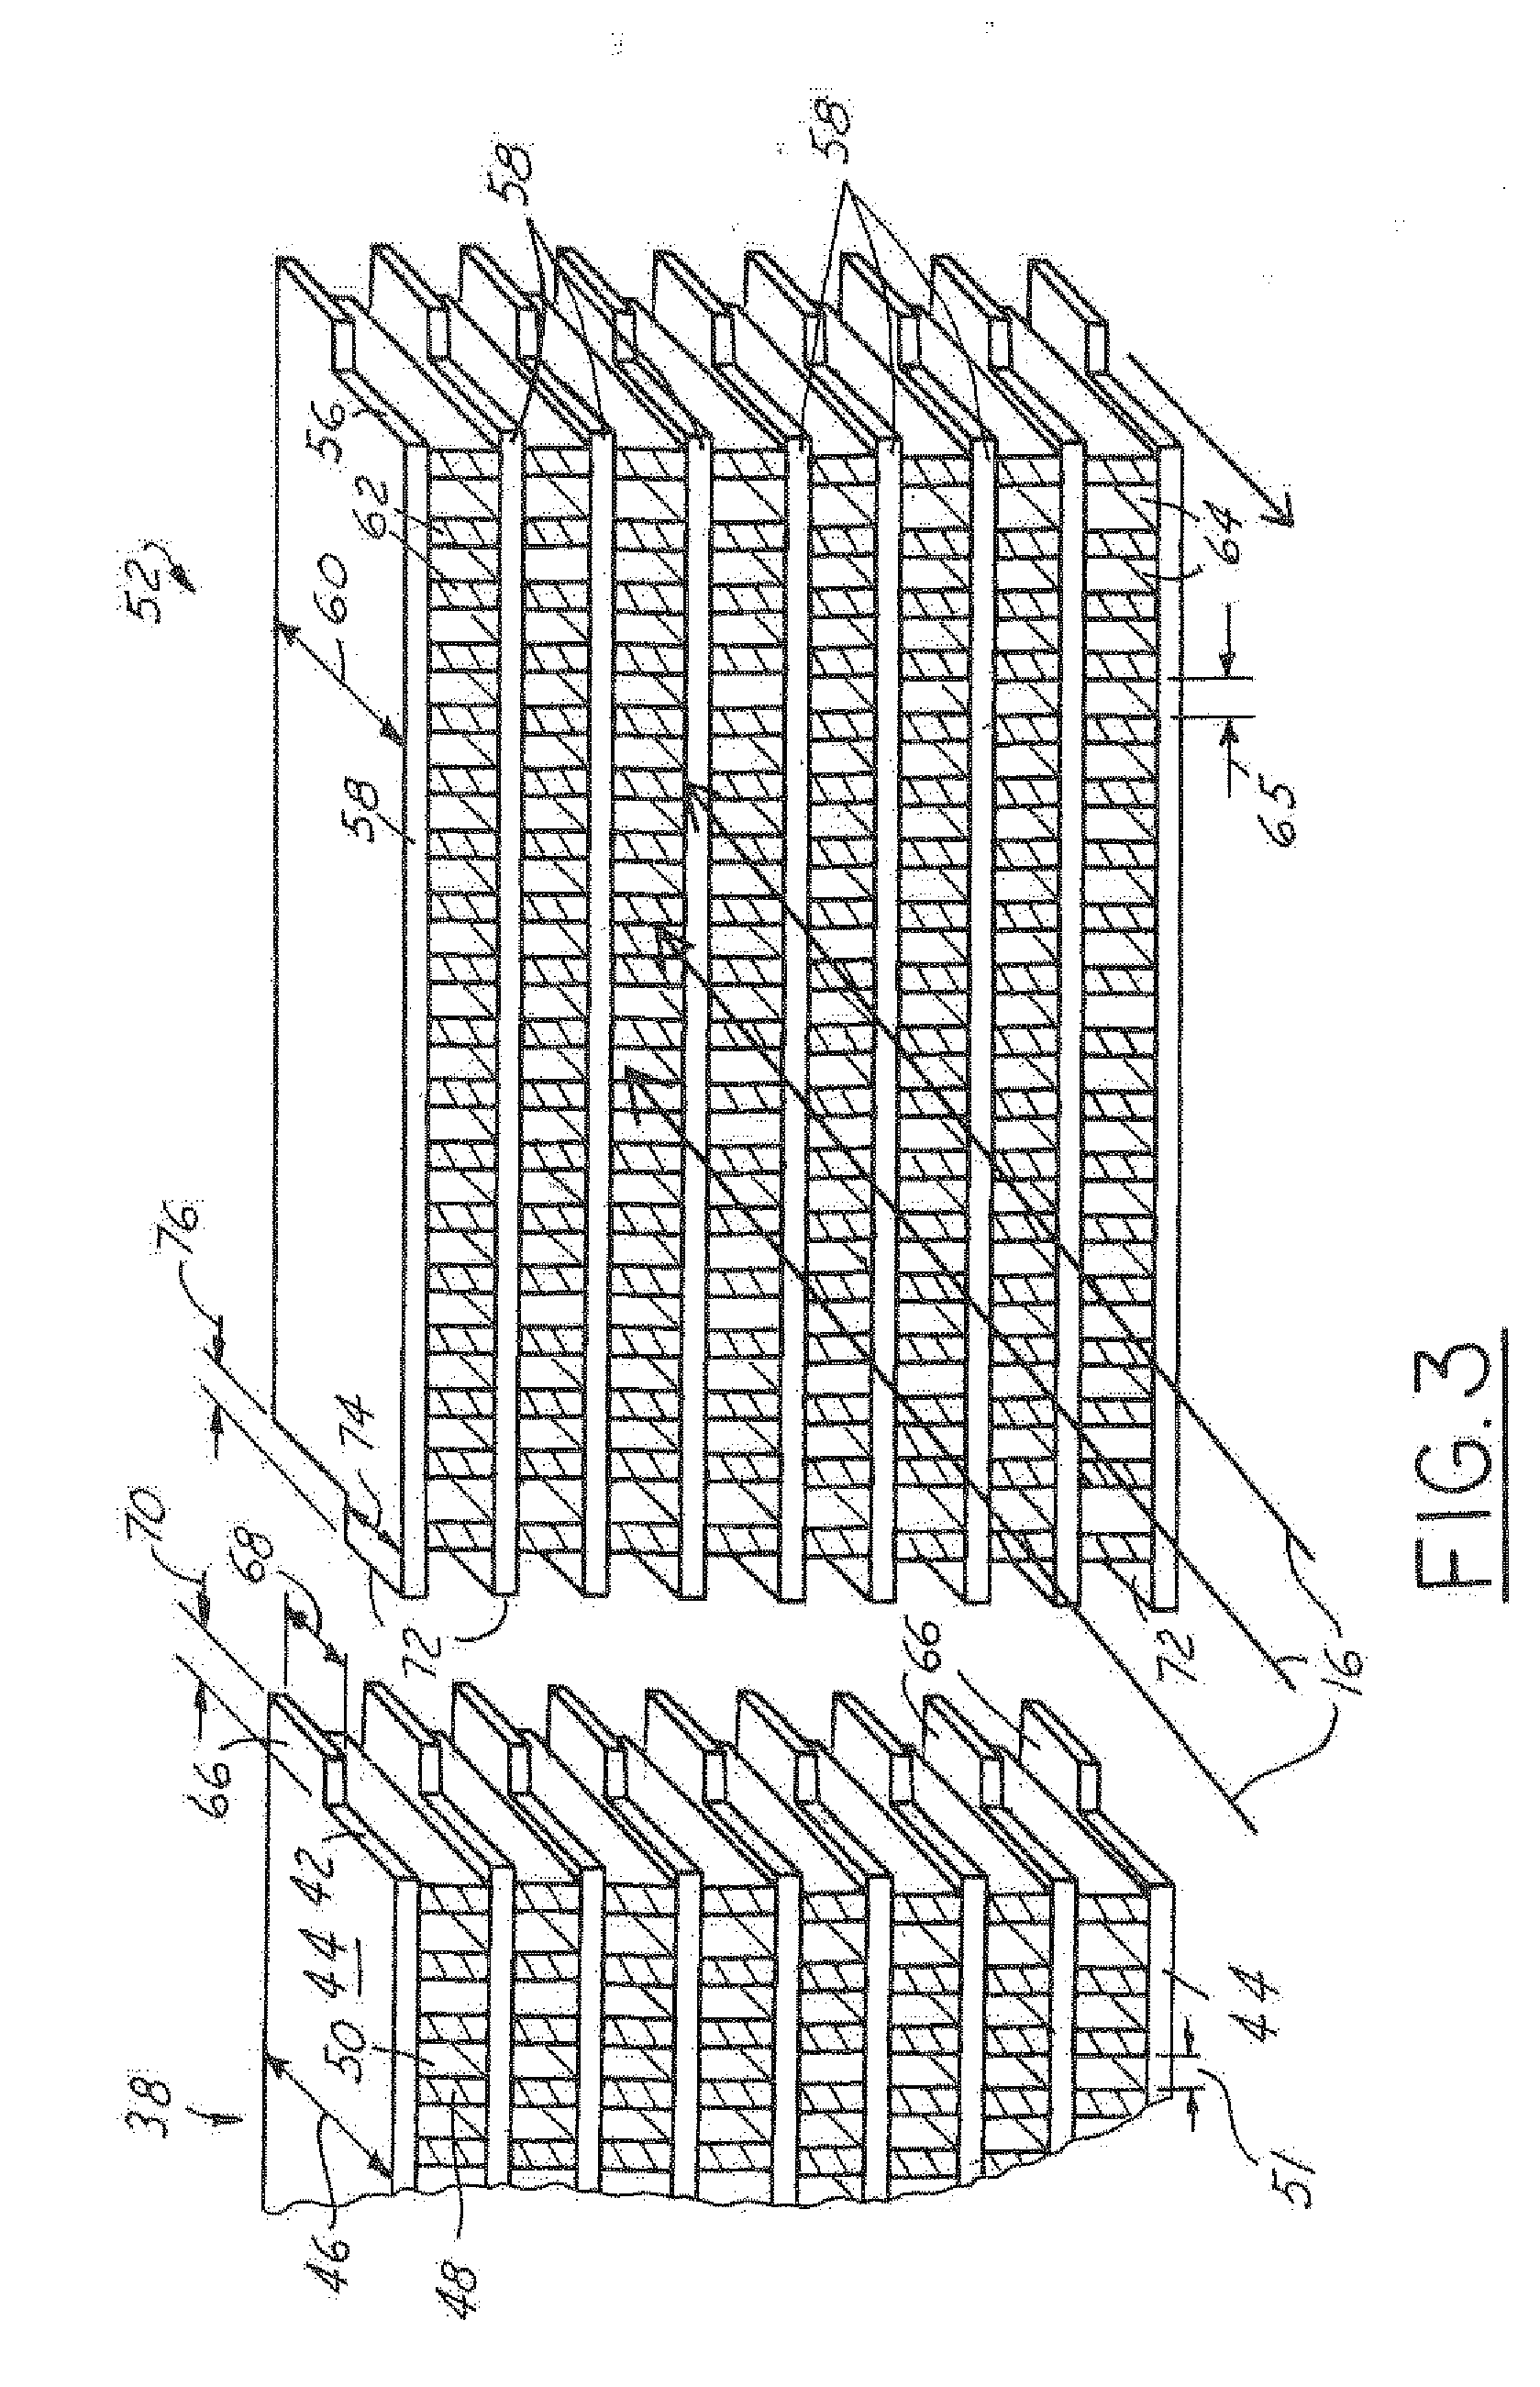 Segmented collimator assembly